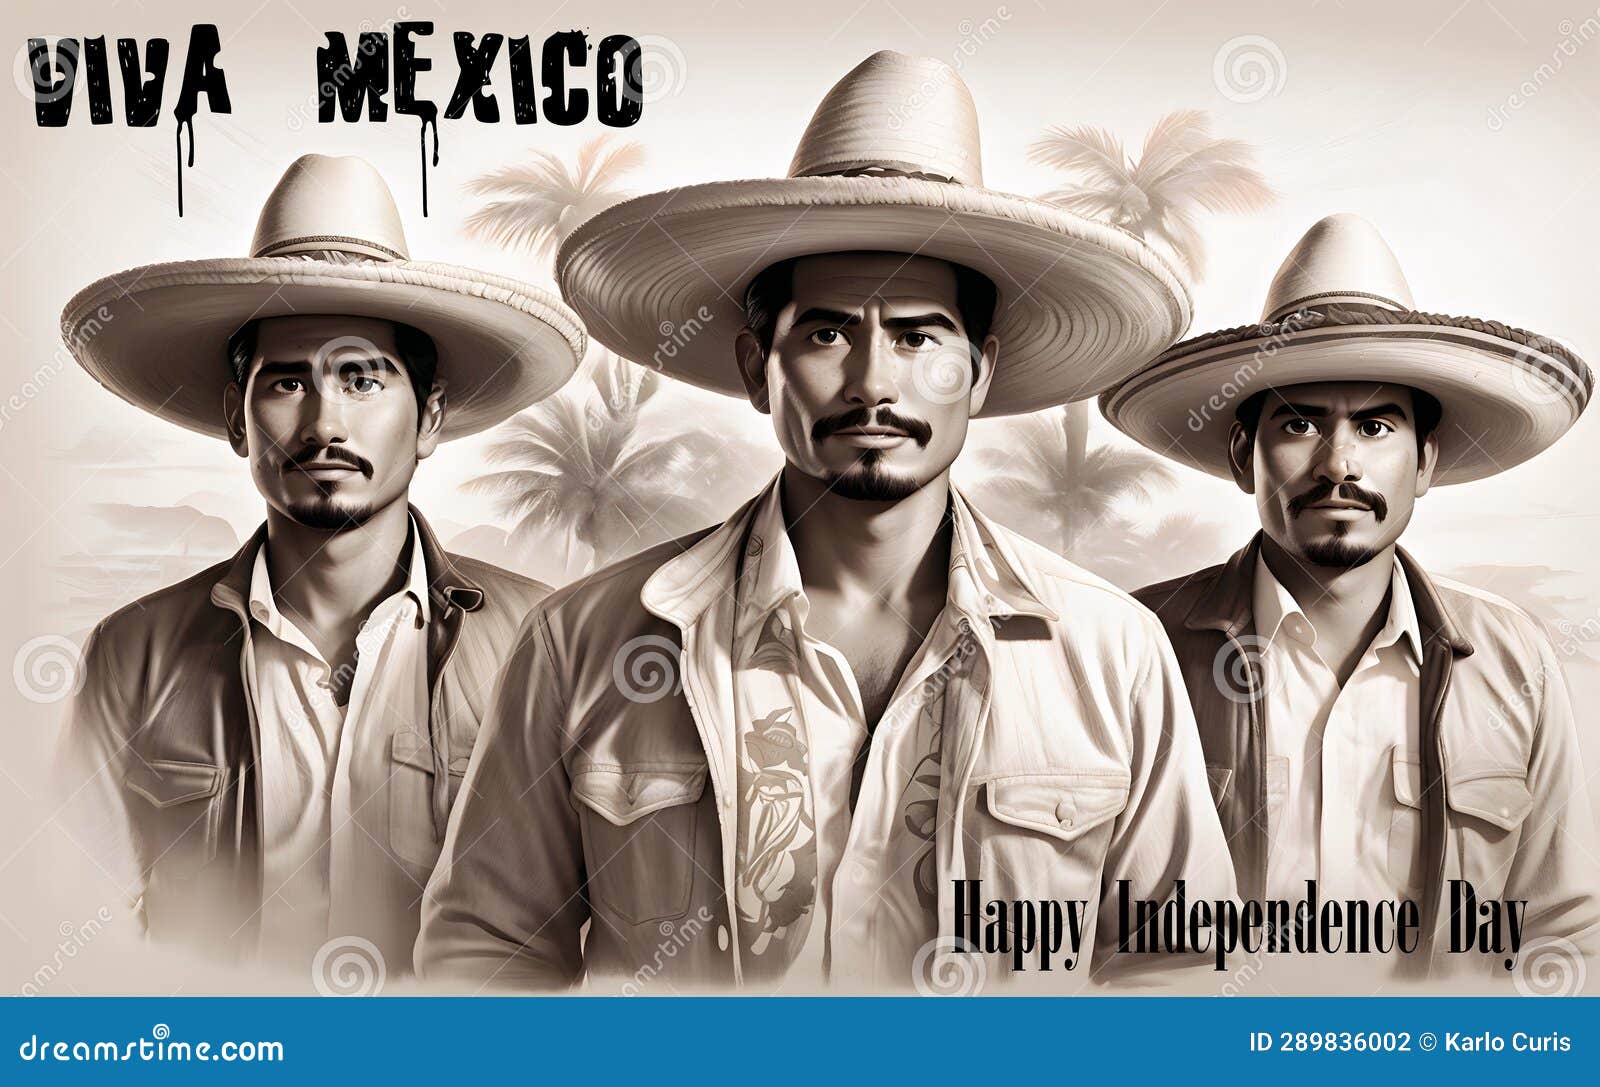 revolucion mexicana, revolucion of mexico, happy mexicans background, banner with copy space text,